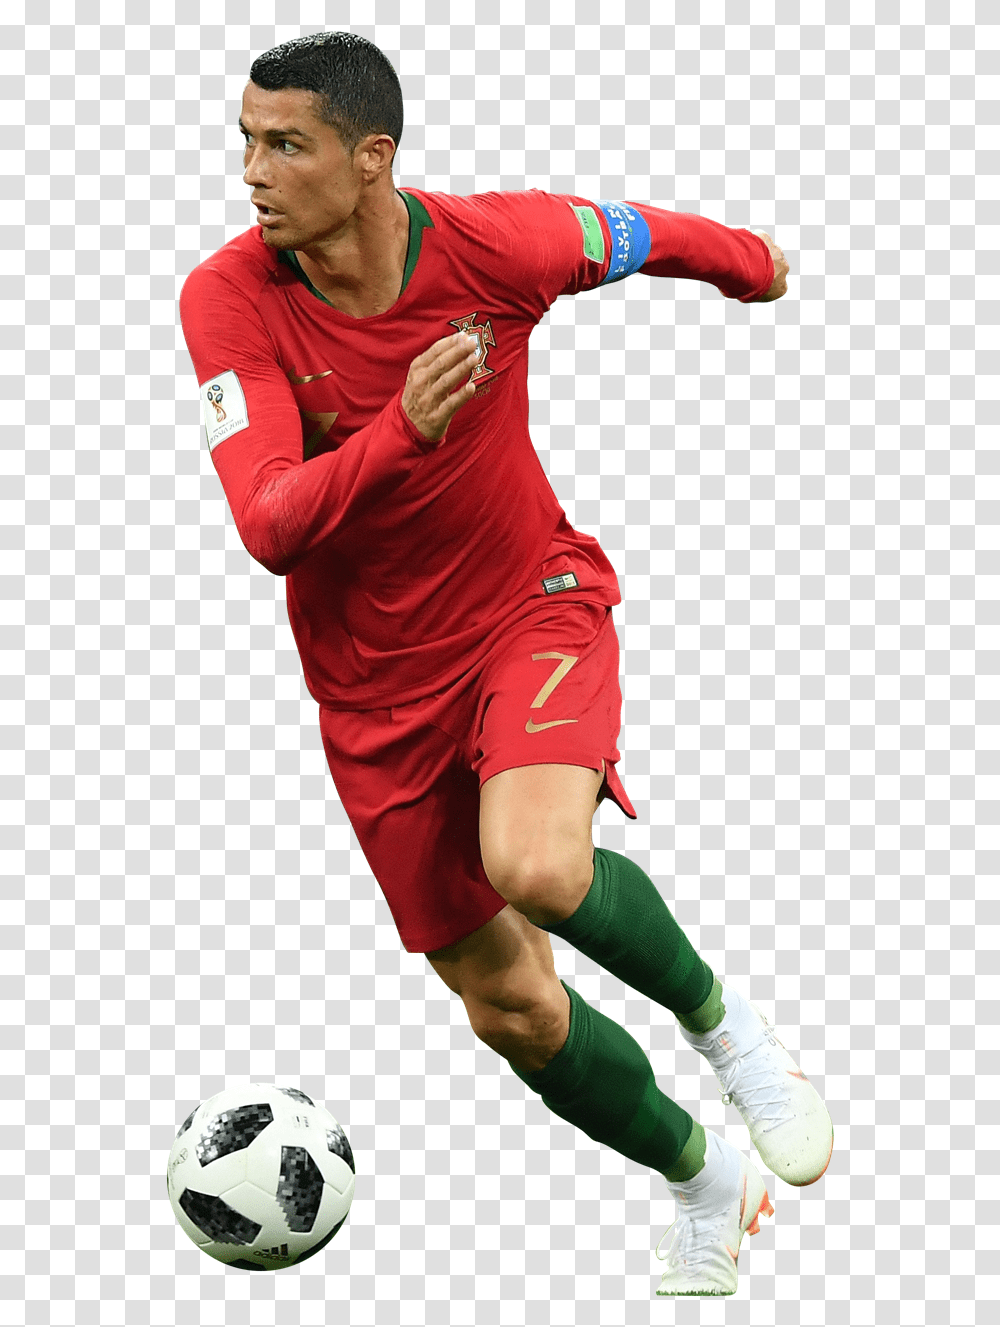 Pin De Yeung Ernest En Football Cups Cristiano Ronaldo Portugal, Soccer Ball, Team Sport, Person, People Transparent Png